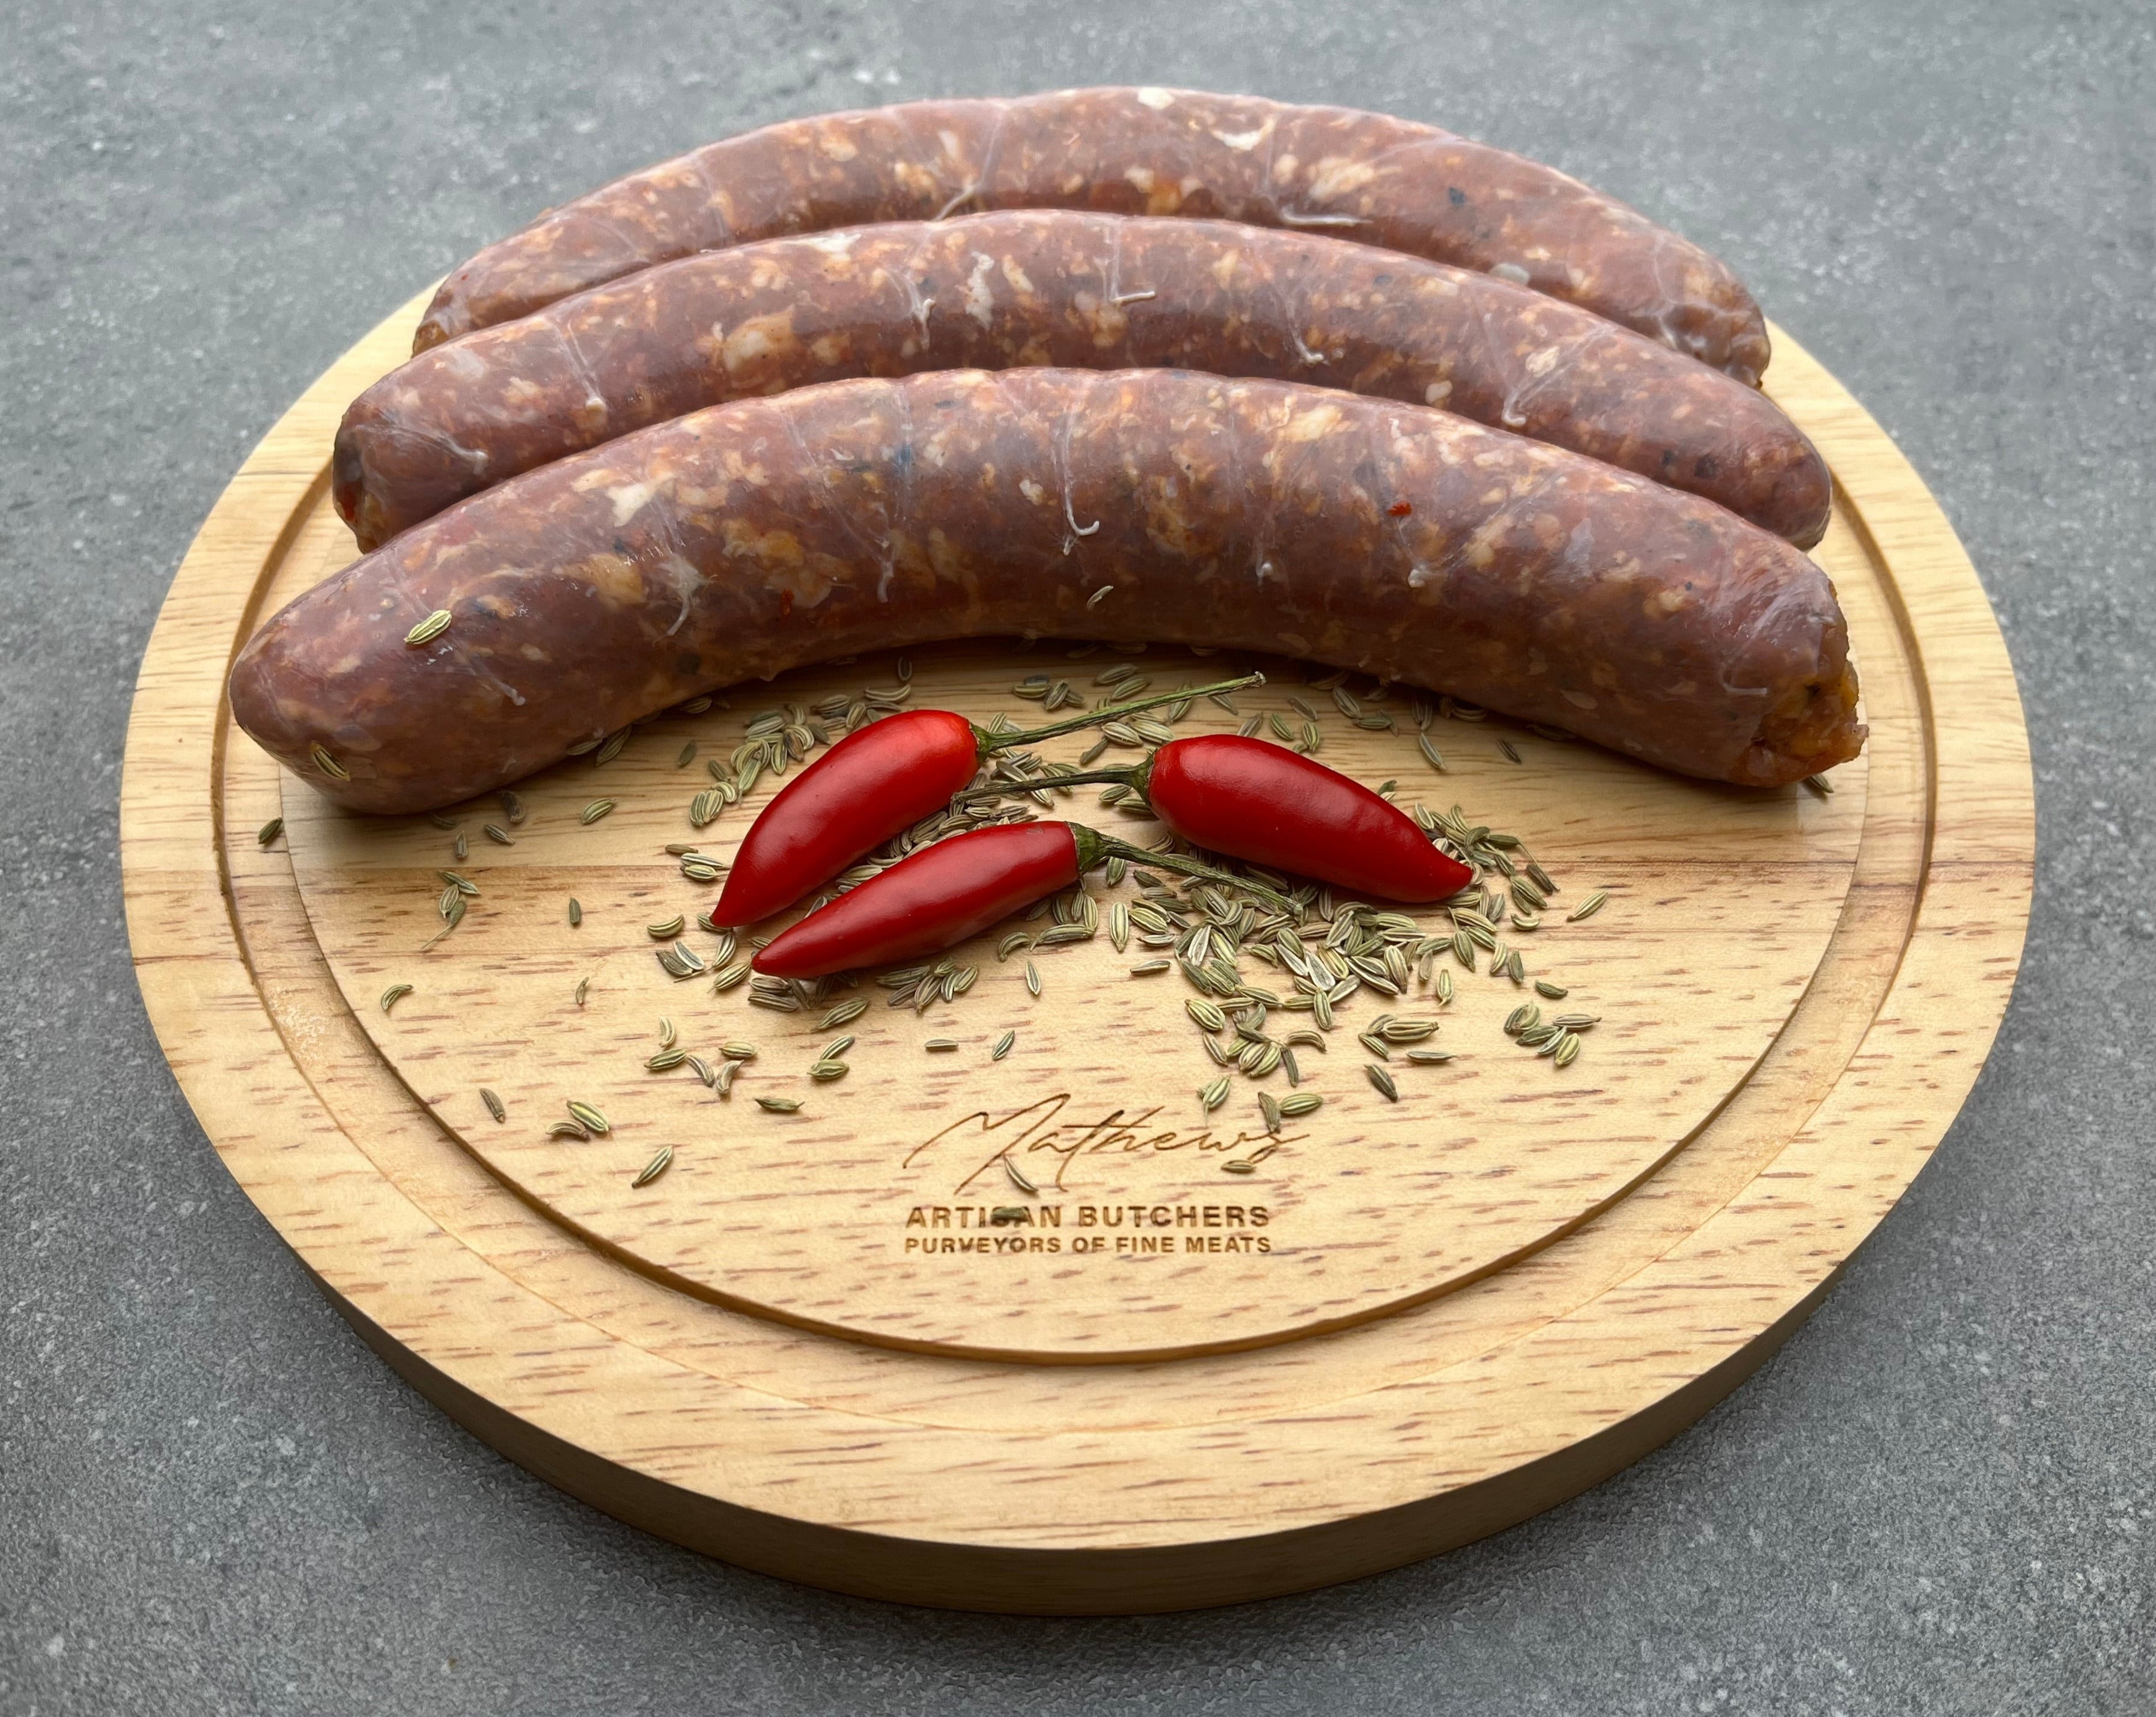 Free Range Calabrese Chilli & Fennel Sausages